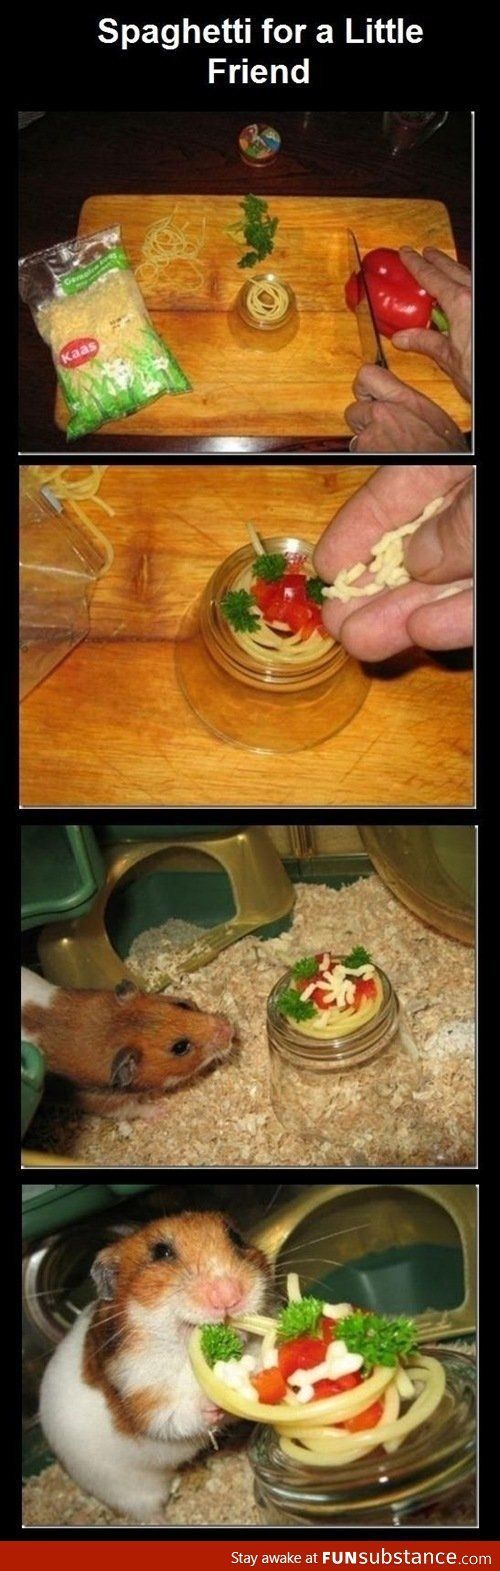 Sphagetti for a Little Friend. Laugh out loud. Adorable, furry animal. Squee. Ha